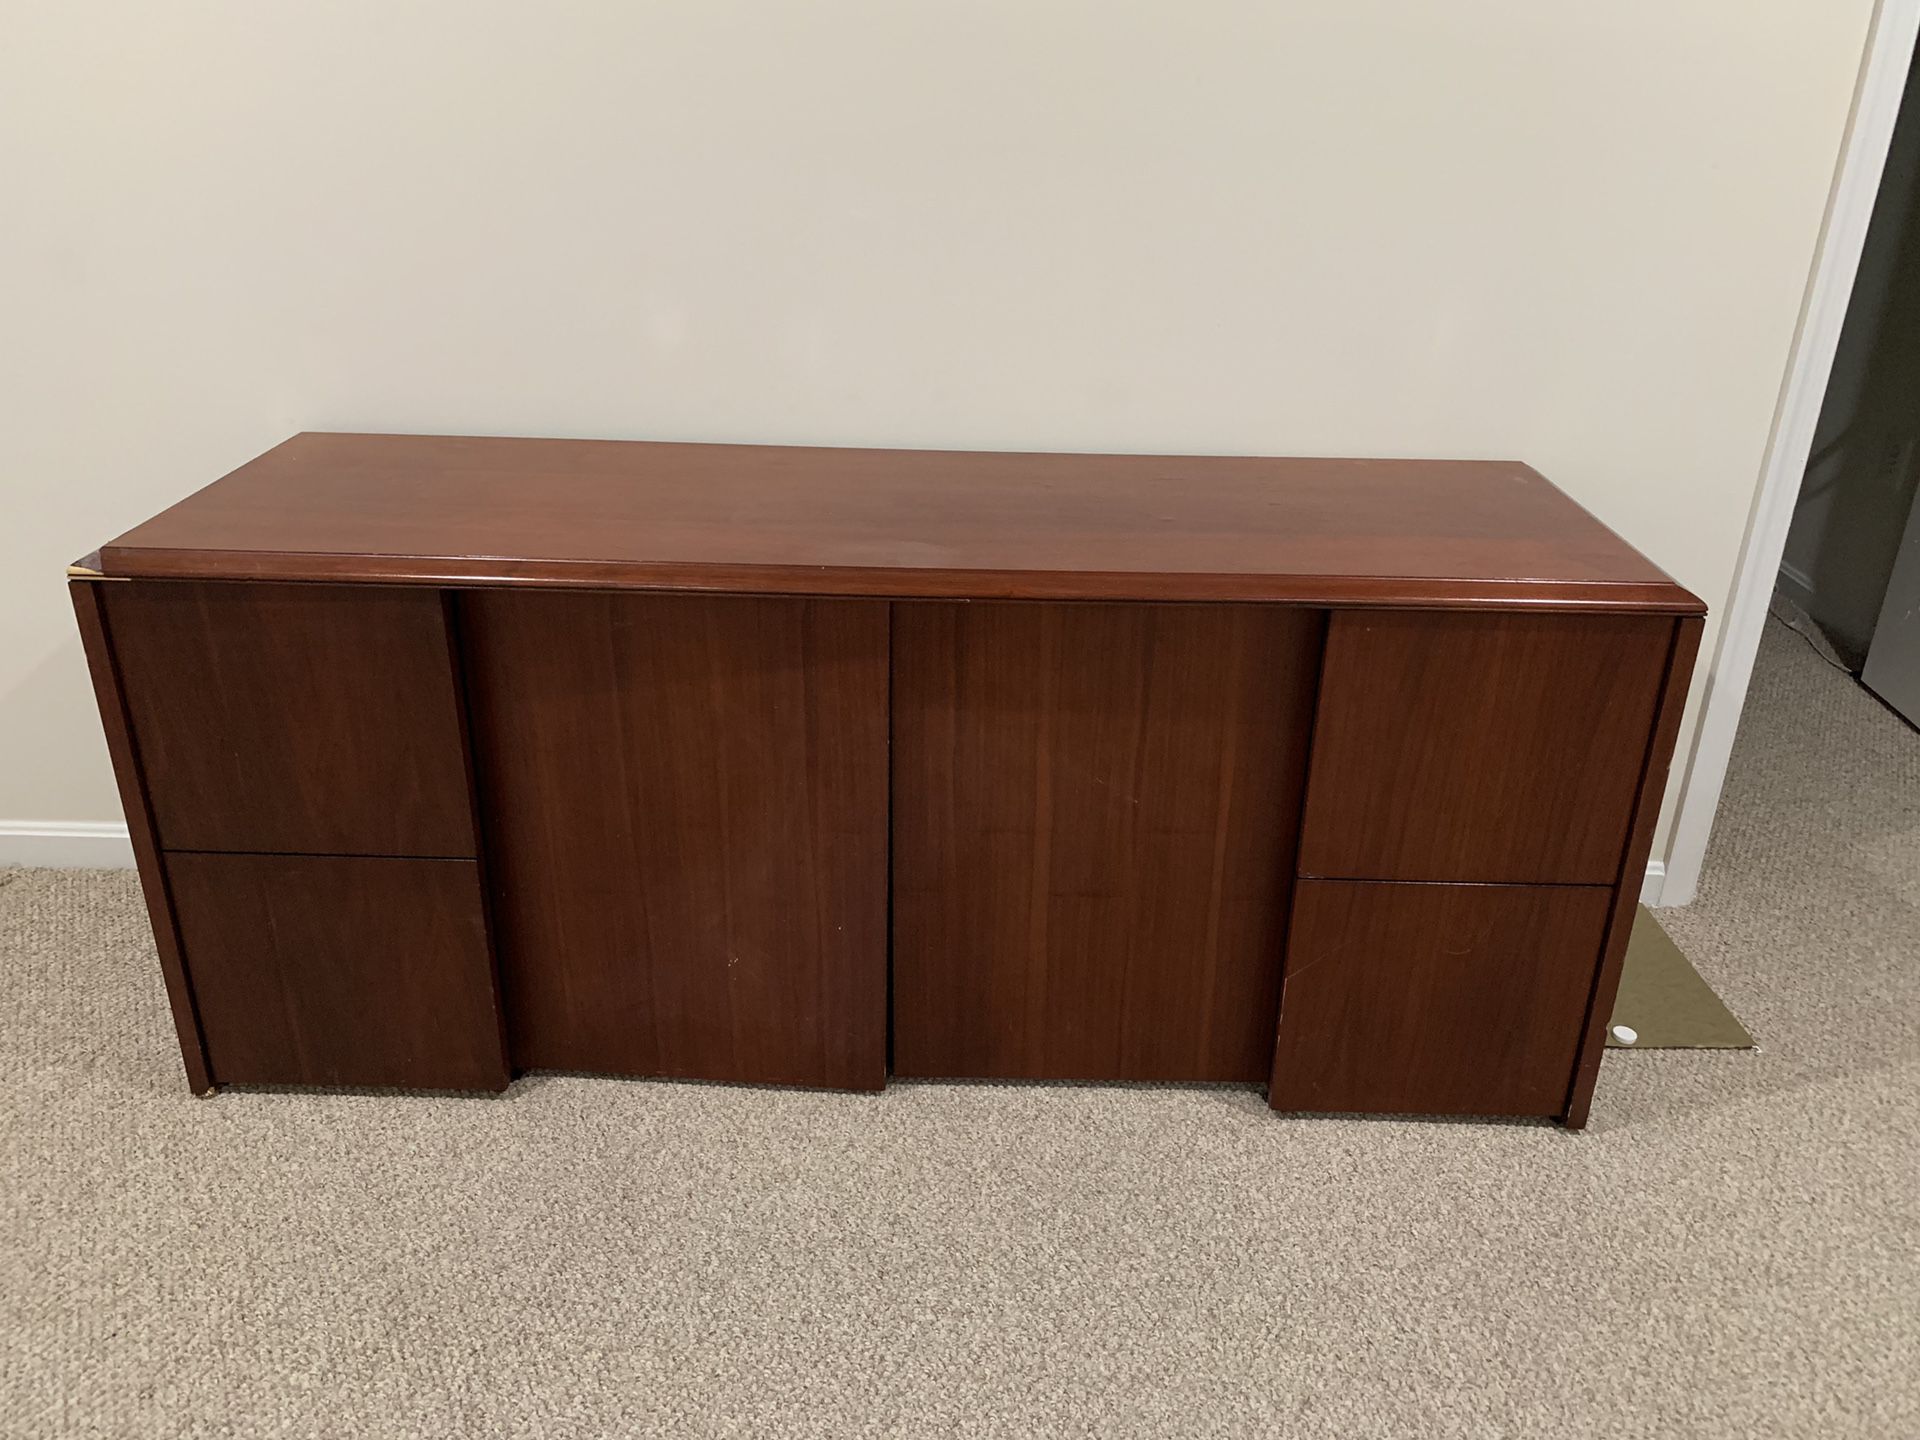 Good condition wood File cabinet Length 70 inches height 30 width 22 it's extra for me not in use